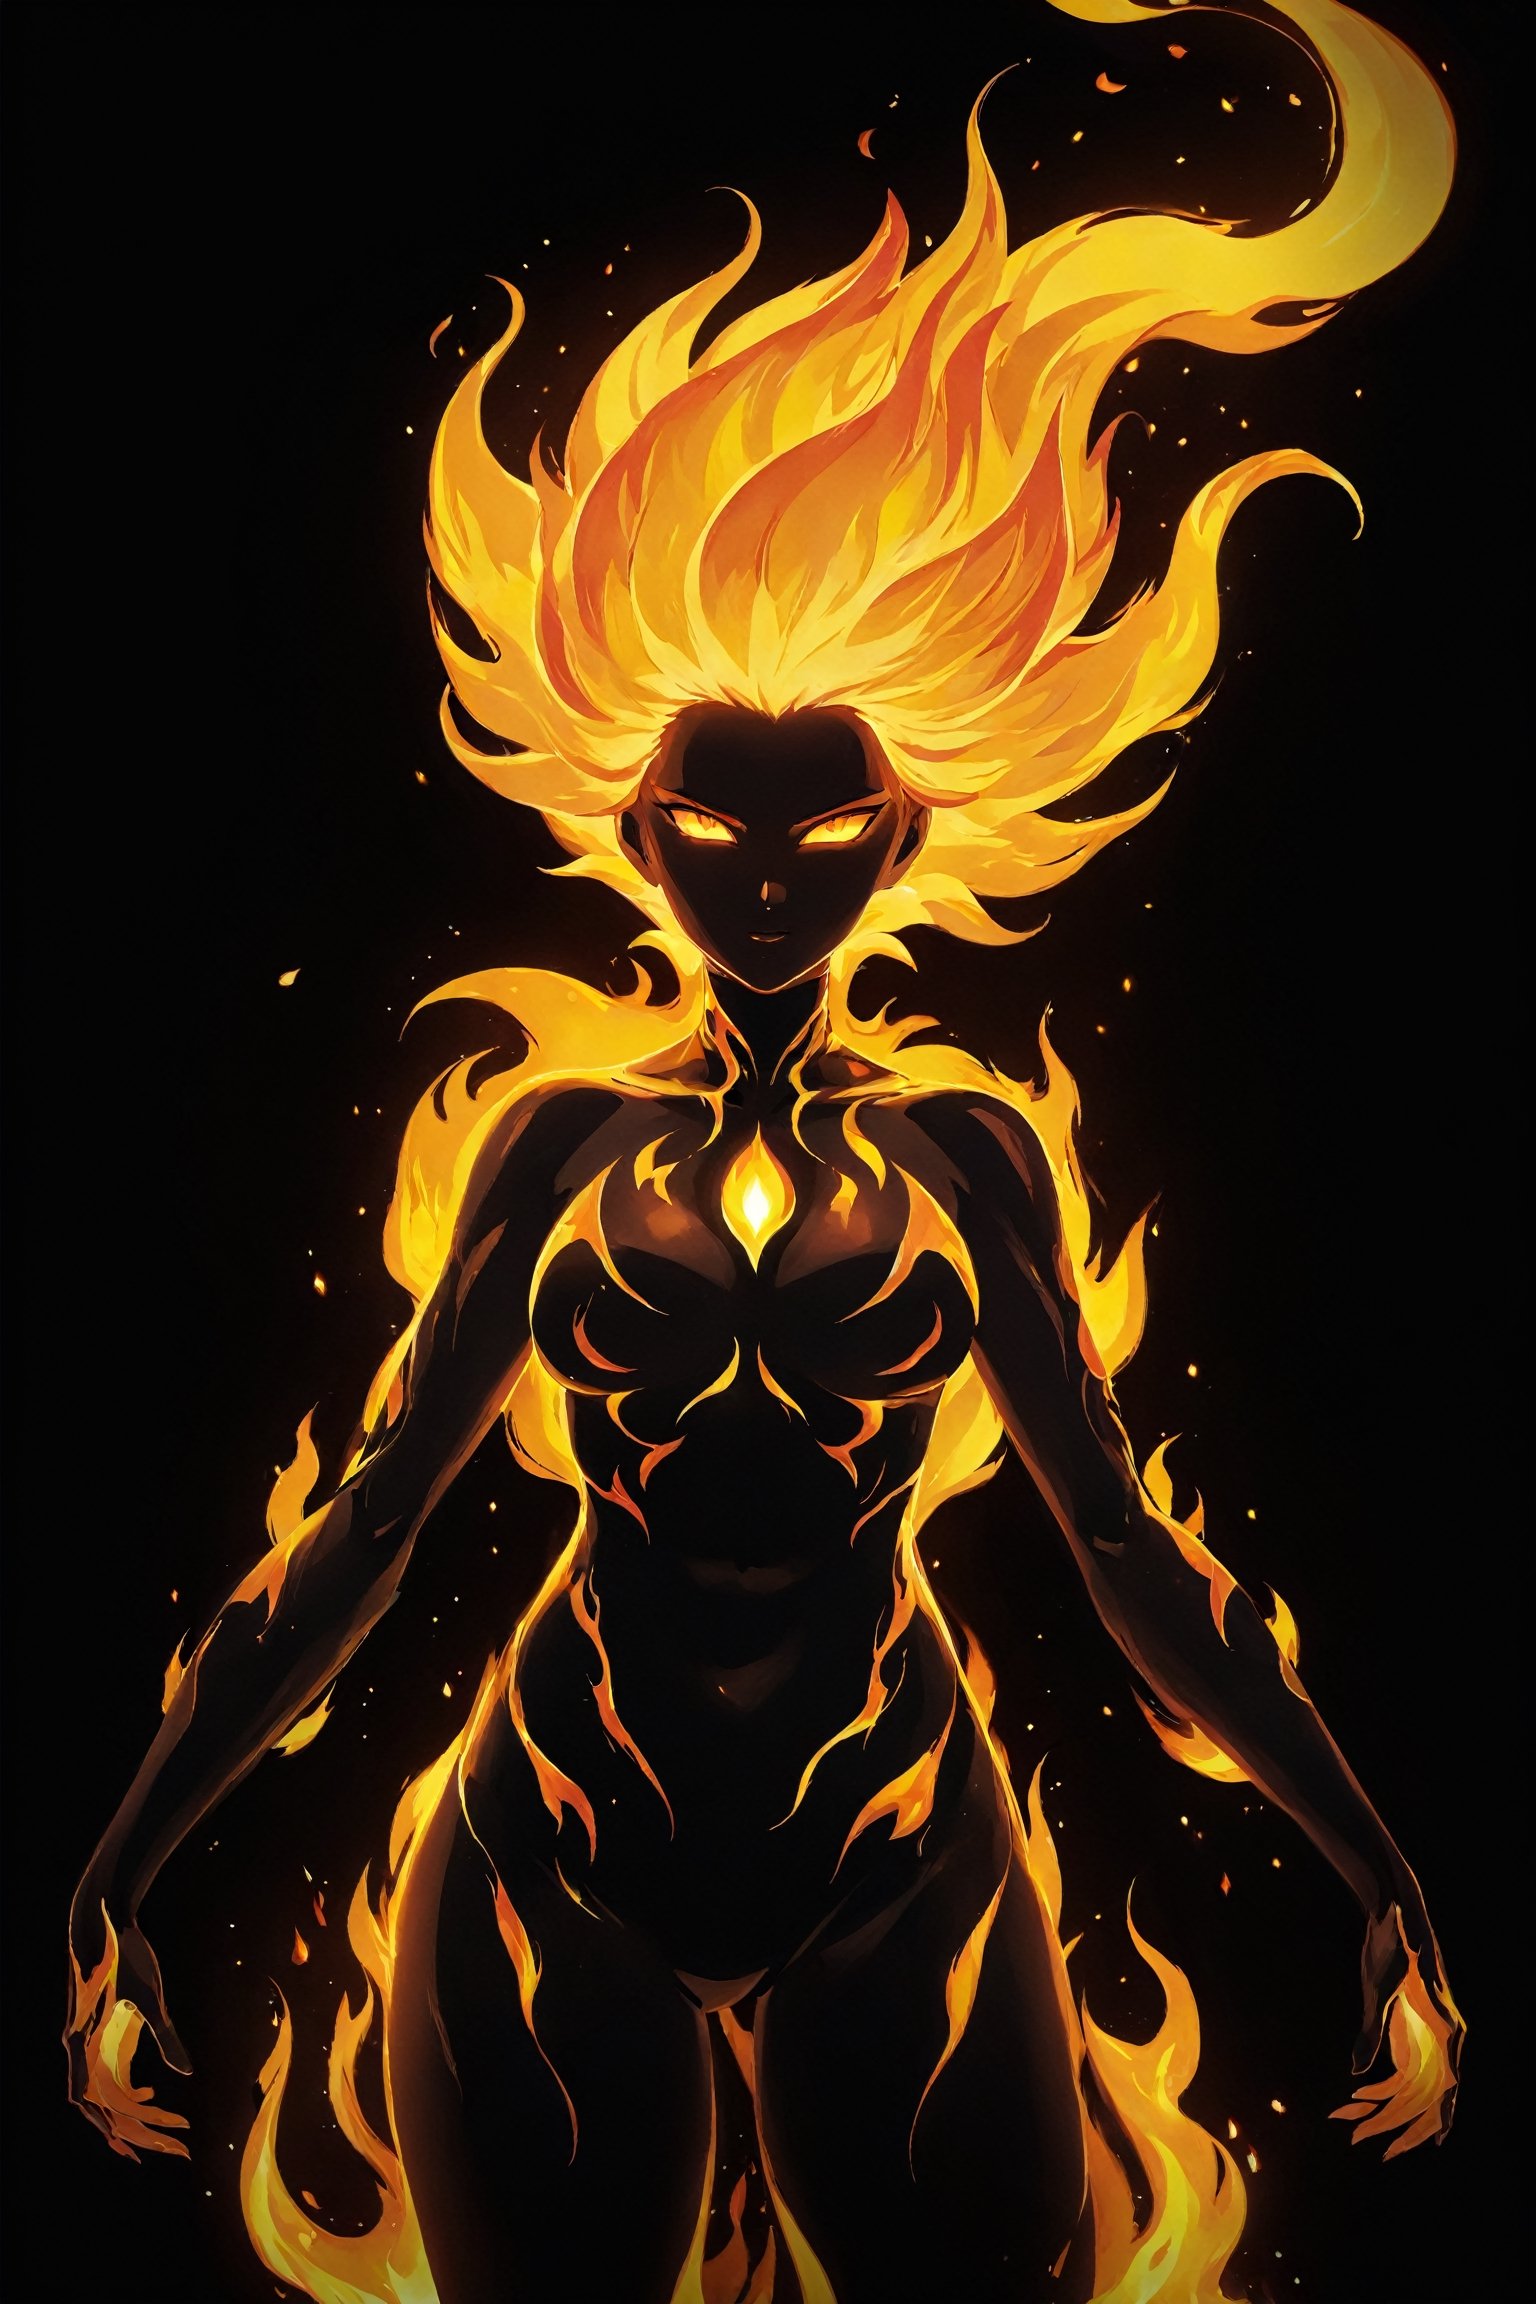 (best quality,8k,ultra detailed), (anime art illustration:1.3), (flat vector image:1.2), (mid-shot:1.3), (minimalistic:1.2), (simple cute diffuse female fire spirit creature:1.3), (woman made entirely of fire:1.3), (flaming hair:1.2), (creature sculpted by flames:1.3), (humanoid form made entirely of fire and not flesh and bones:1.3), (fire is her raw material, her constitution, and her being:1.3), (solid black background:1.2), (ultra sharp focus:1.3), (detailed face:1.2), (posing:1.2), (illuminated:1.2), (magic:1.3), (supernatural fire spirit:1.3), (flames:1.3), (sparkles:1.3), (mystical fire spirit:1.3).